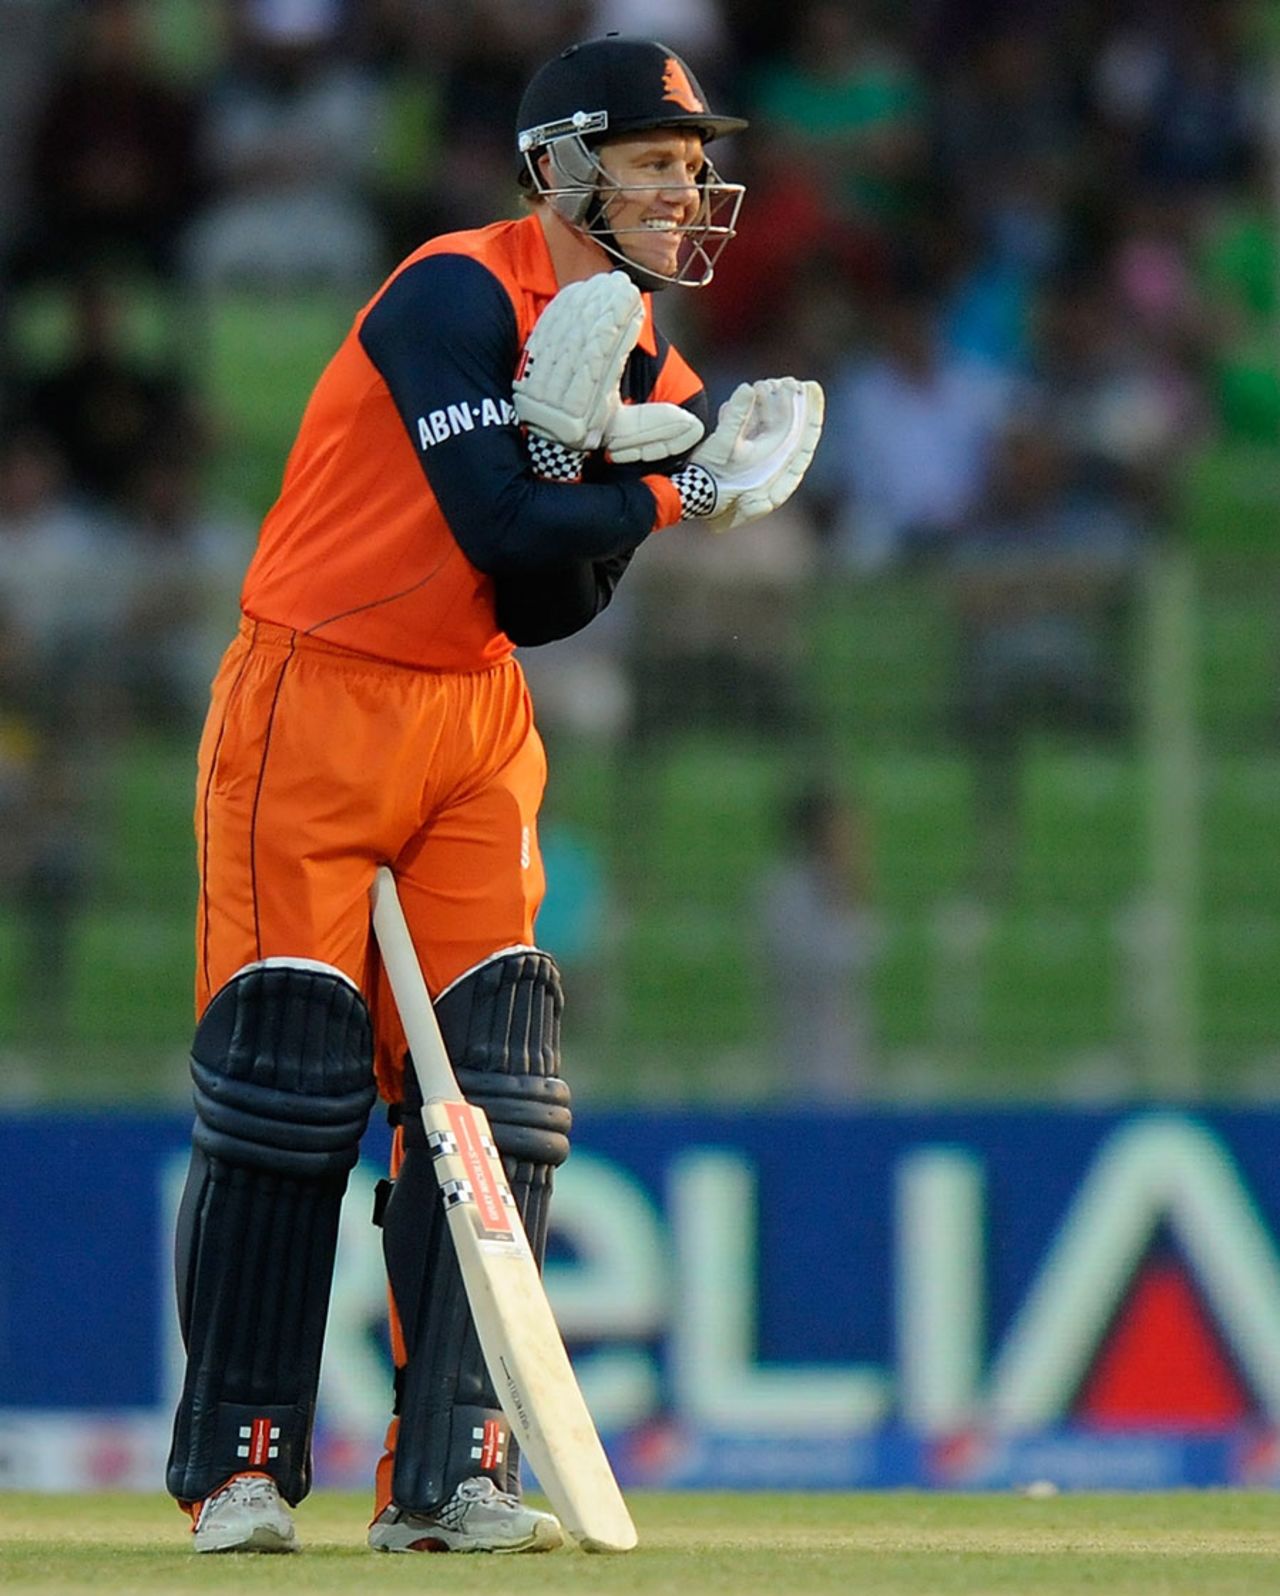 Stephan Myburgh celebrates after reaching his half-century, Ireland v Netherlands, World T20, First Round Group B, Sylhet, March 21, 2014